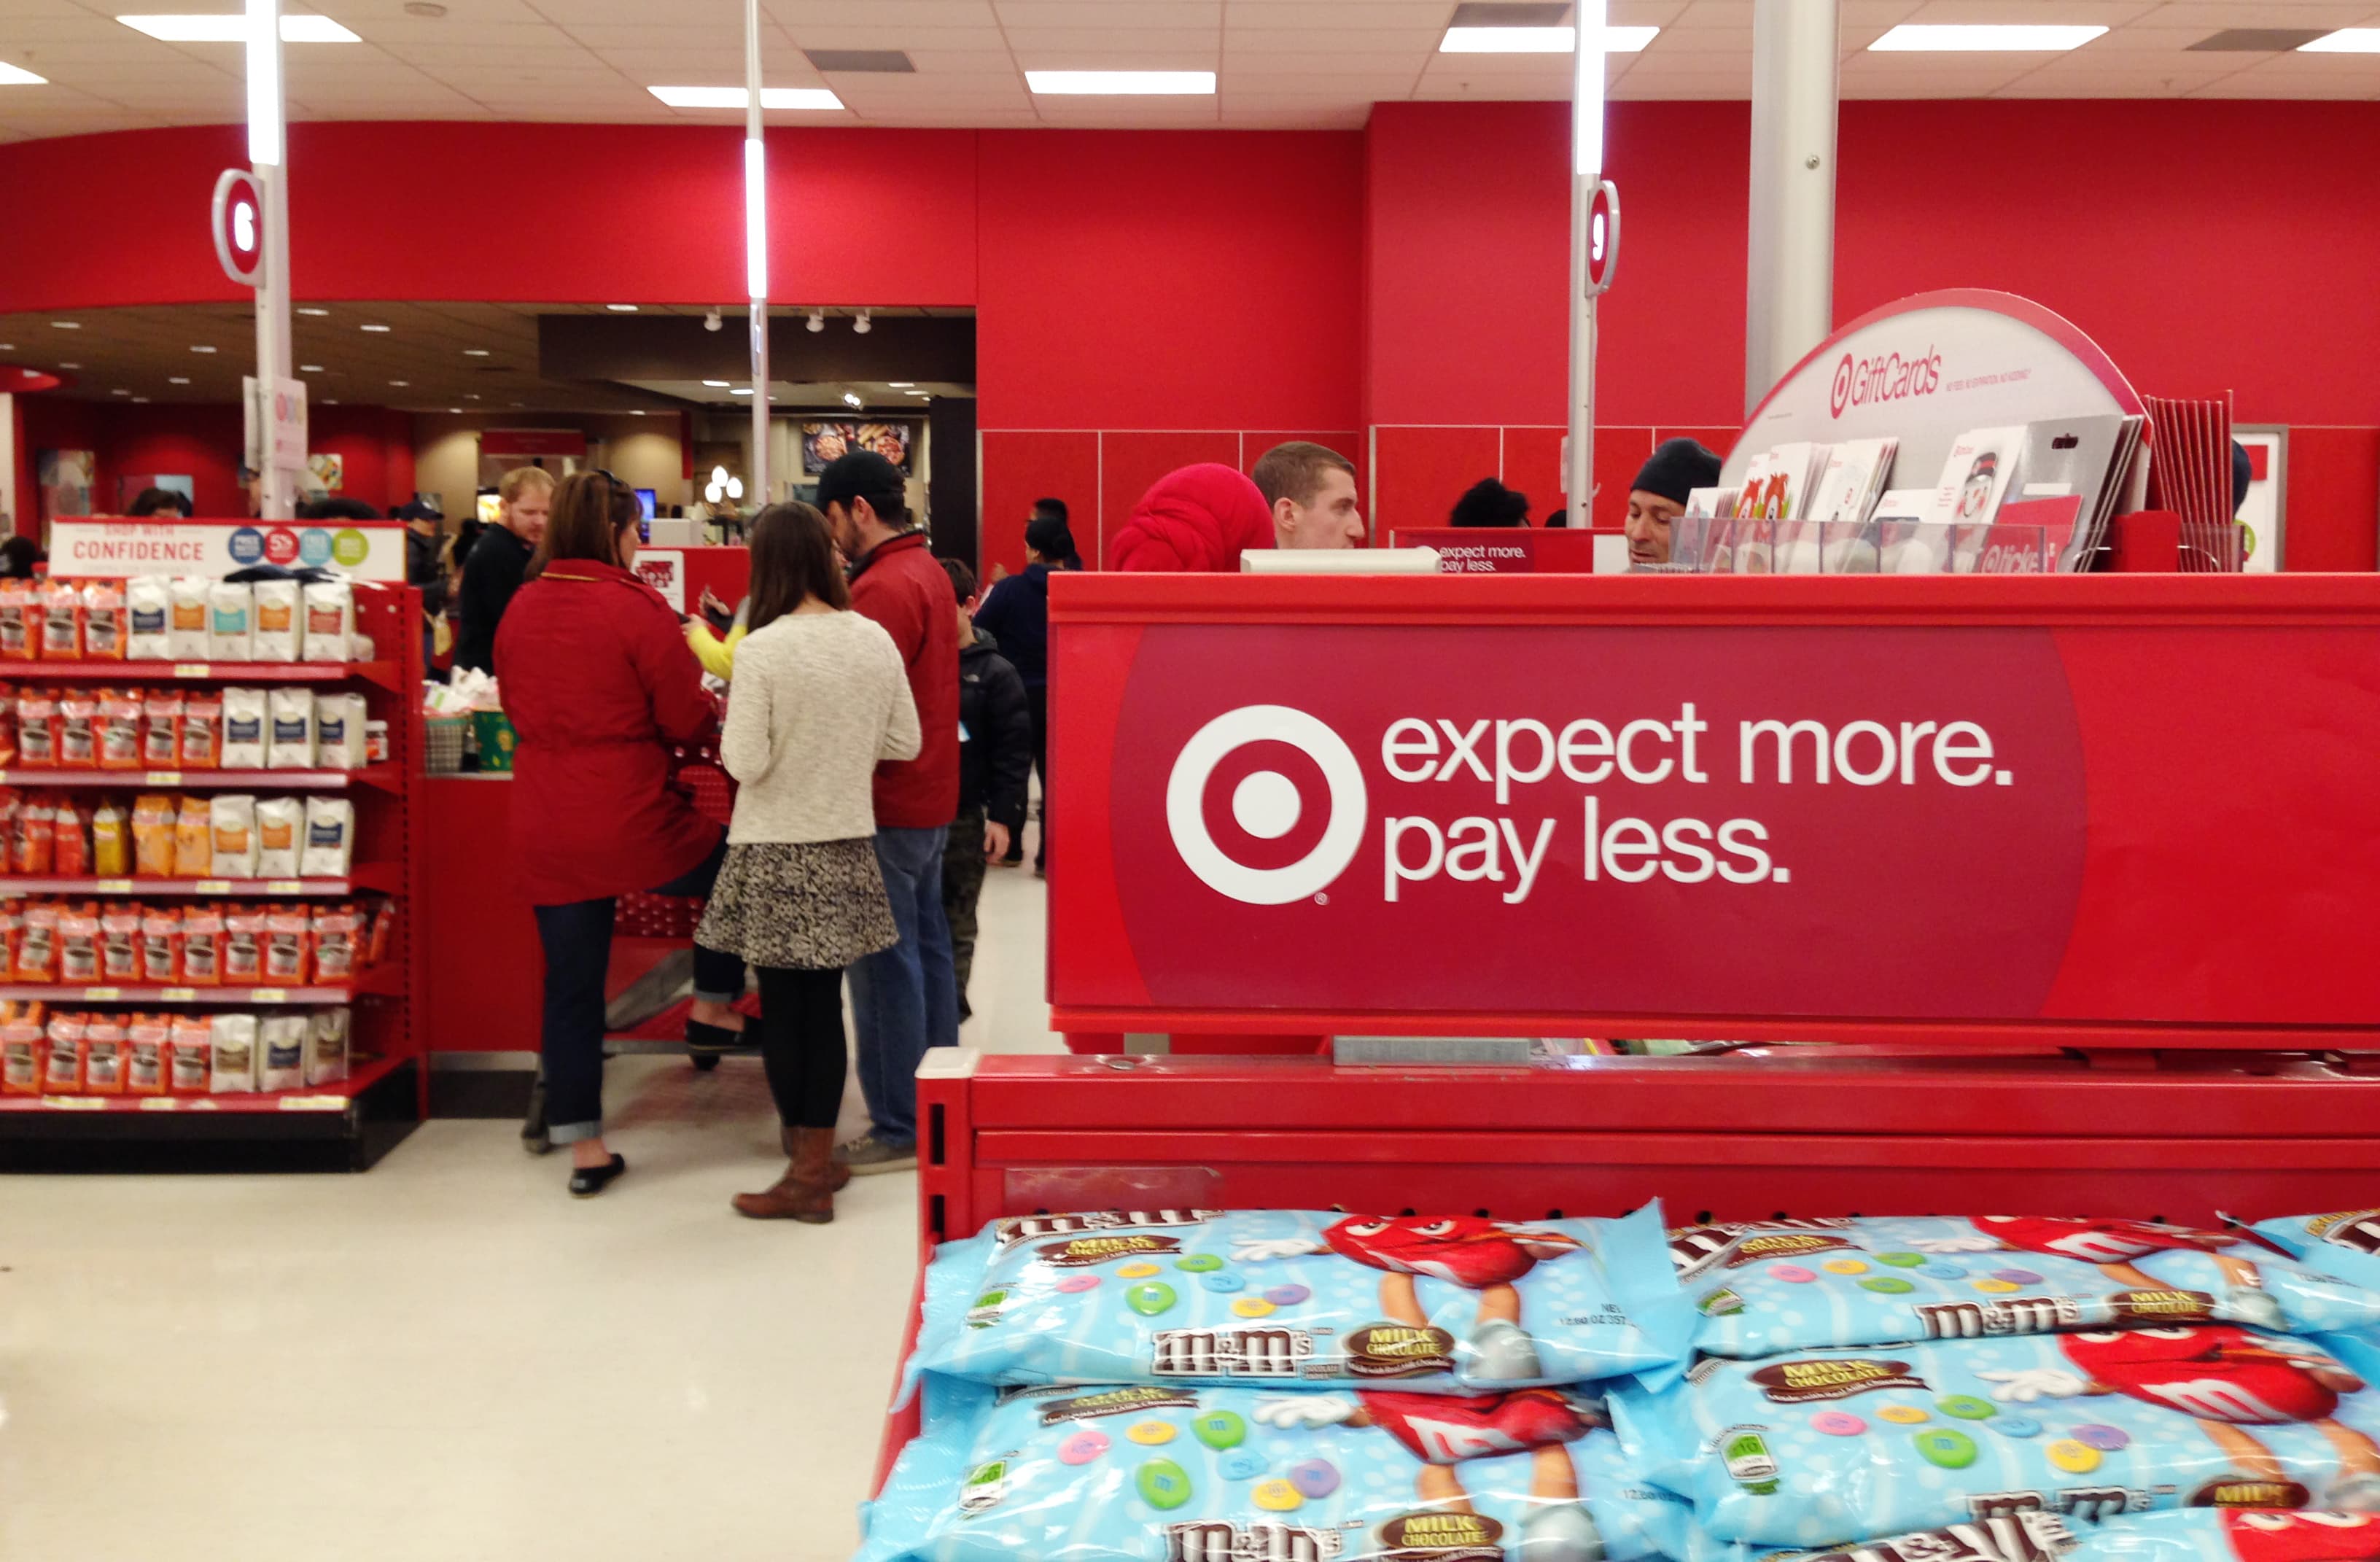 branden castillo recommends target expect more pay less pic